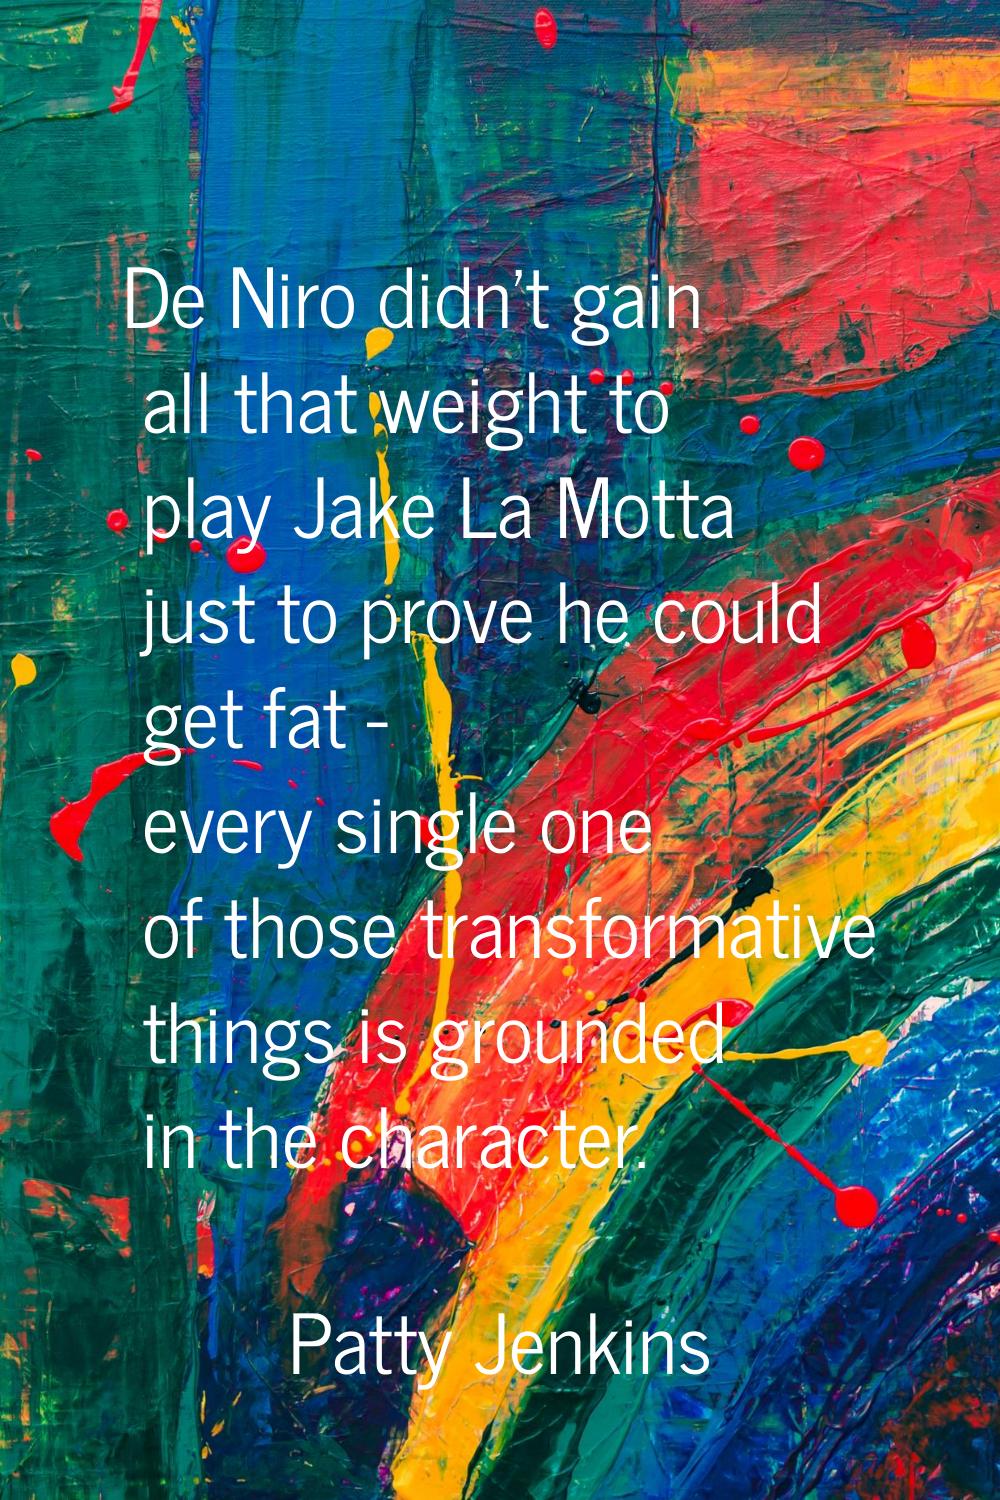 De Niro didn't gain all that weight to play Jake La Motta just to prove he could get fat - every si